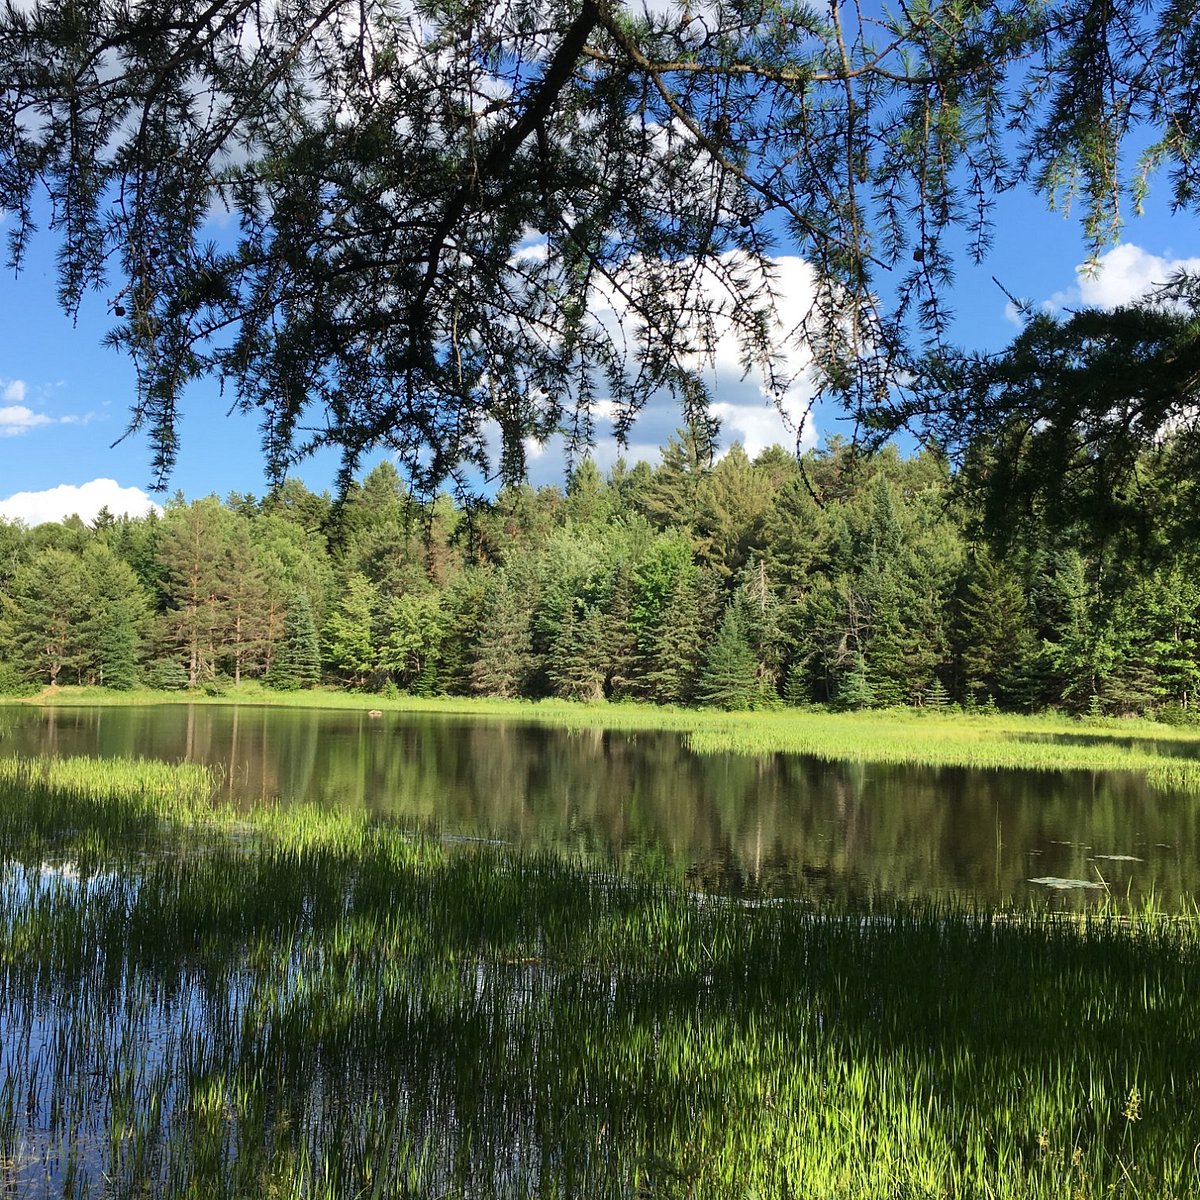 Albums 105+ Images higley flow state park photos Stunning